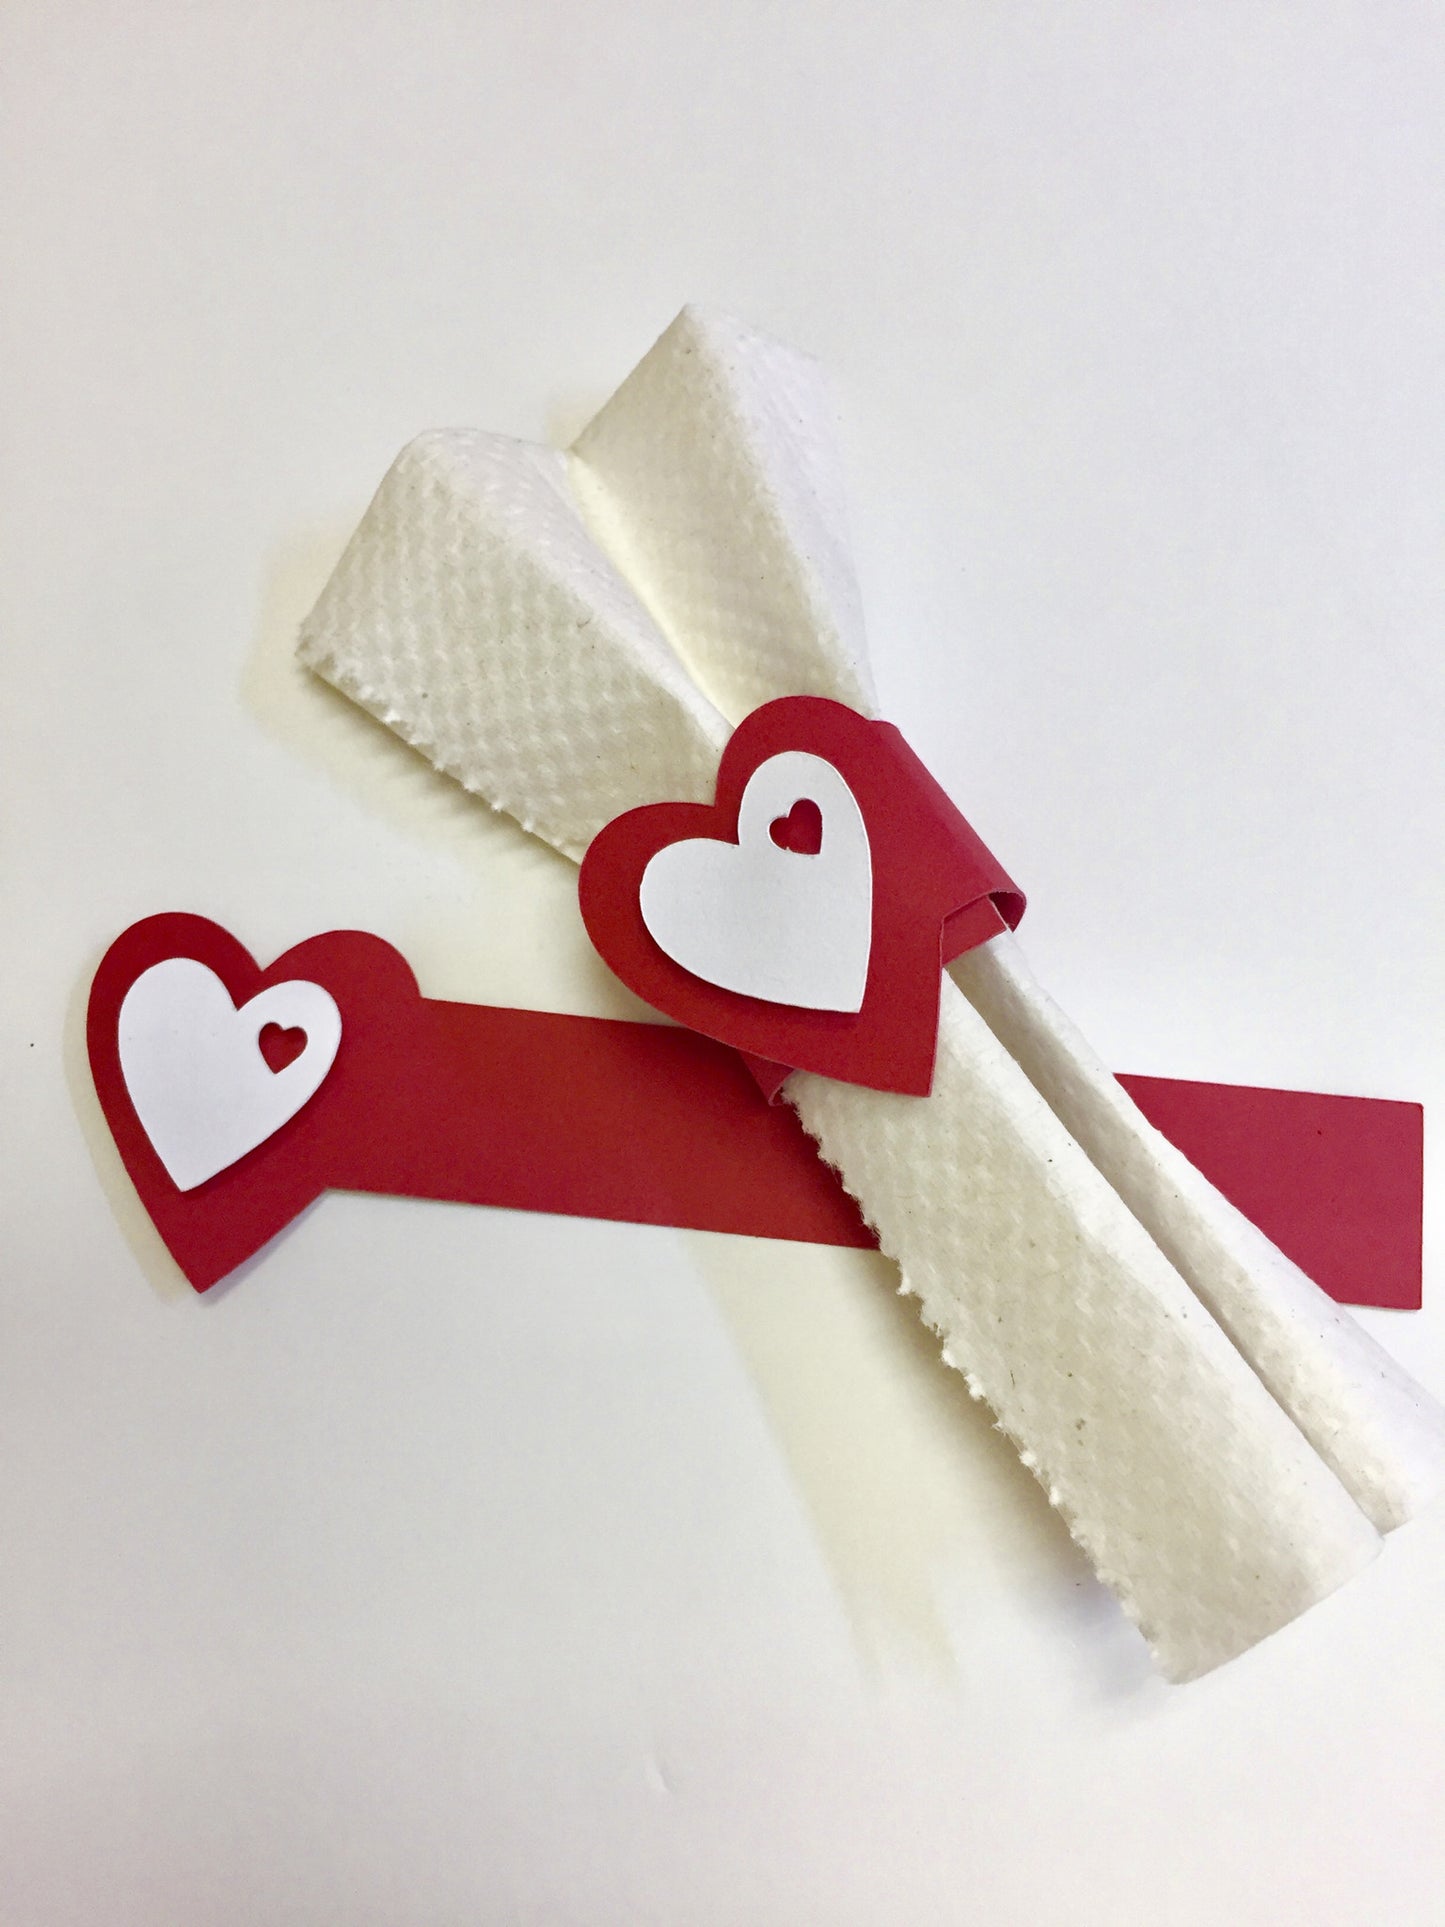 Red Heart Napkin Ring with raised white heart wrapped around a paper napkin